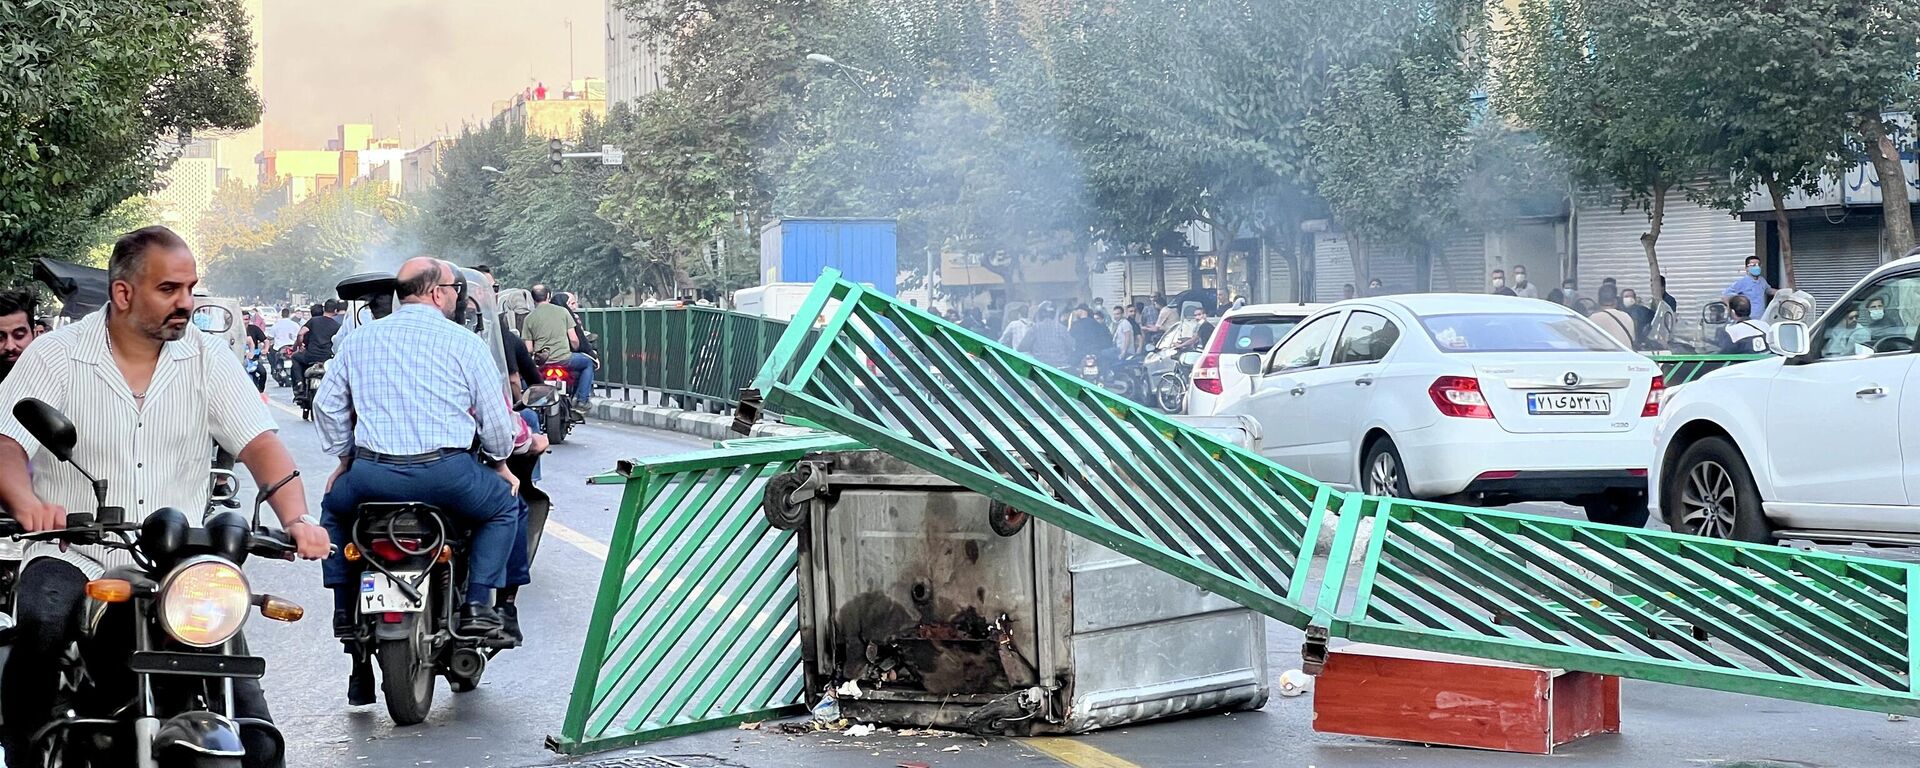 A picture obtained by AFP outside Iran, shows a garbage container blocking a road in the capital Tehran on October 8, 2022. - Sputnik International, 1920, 10.10.2022